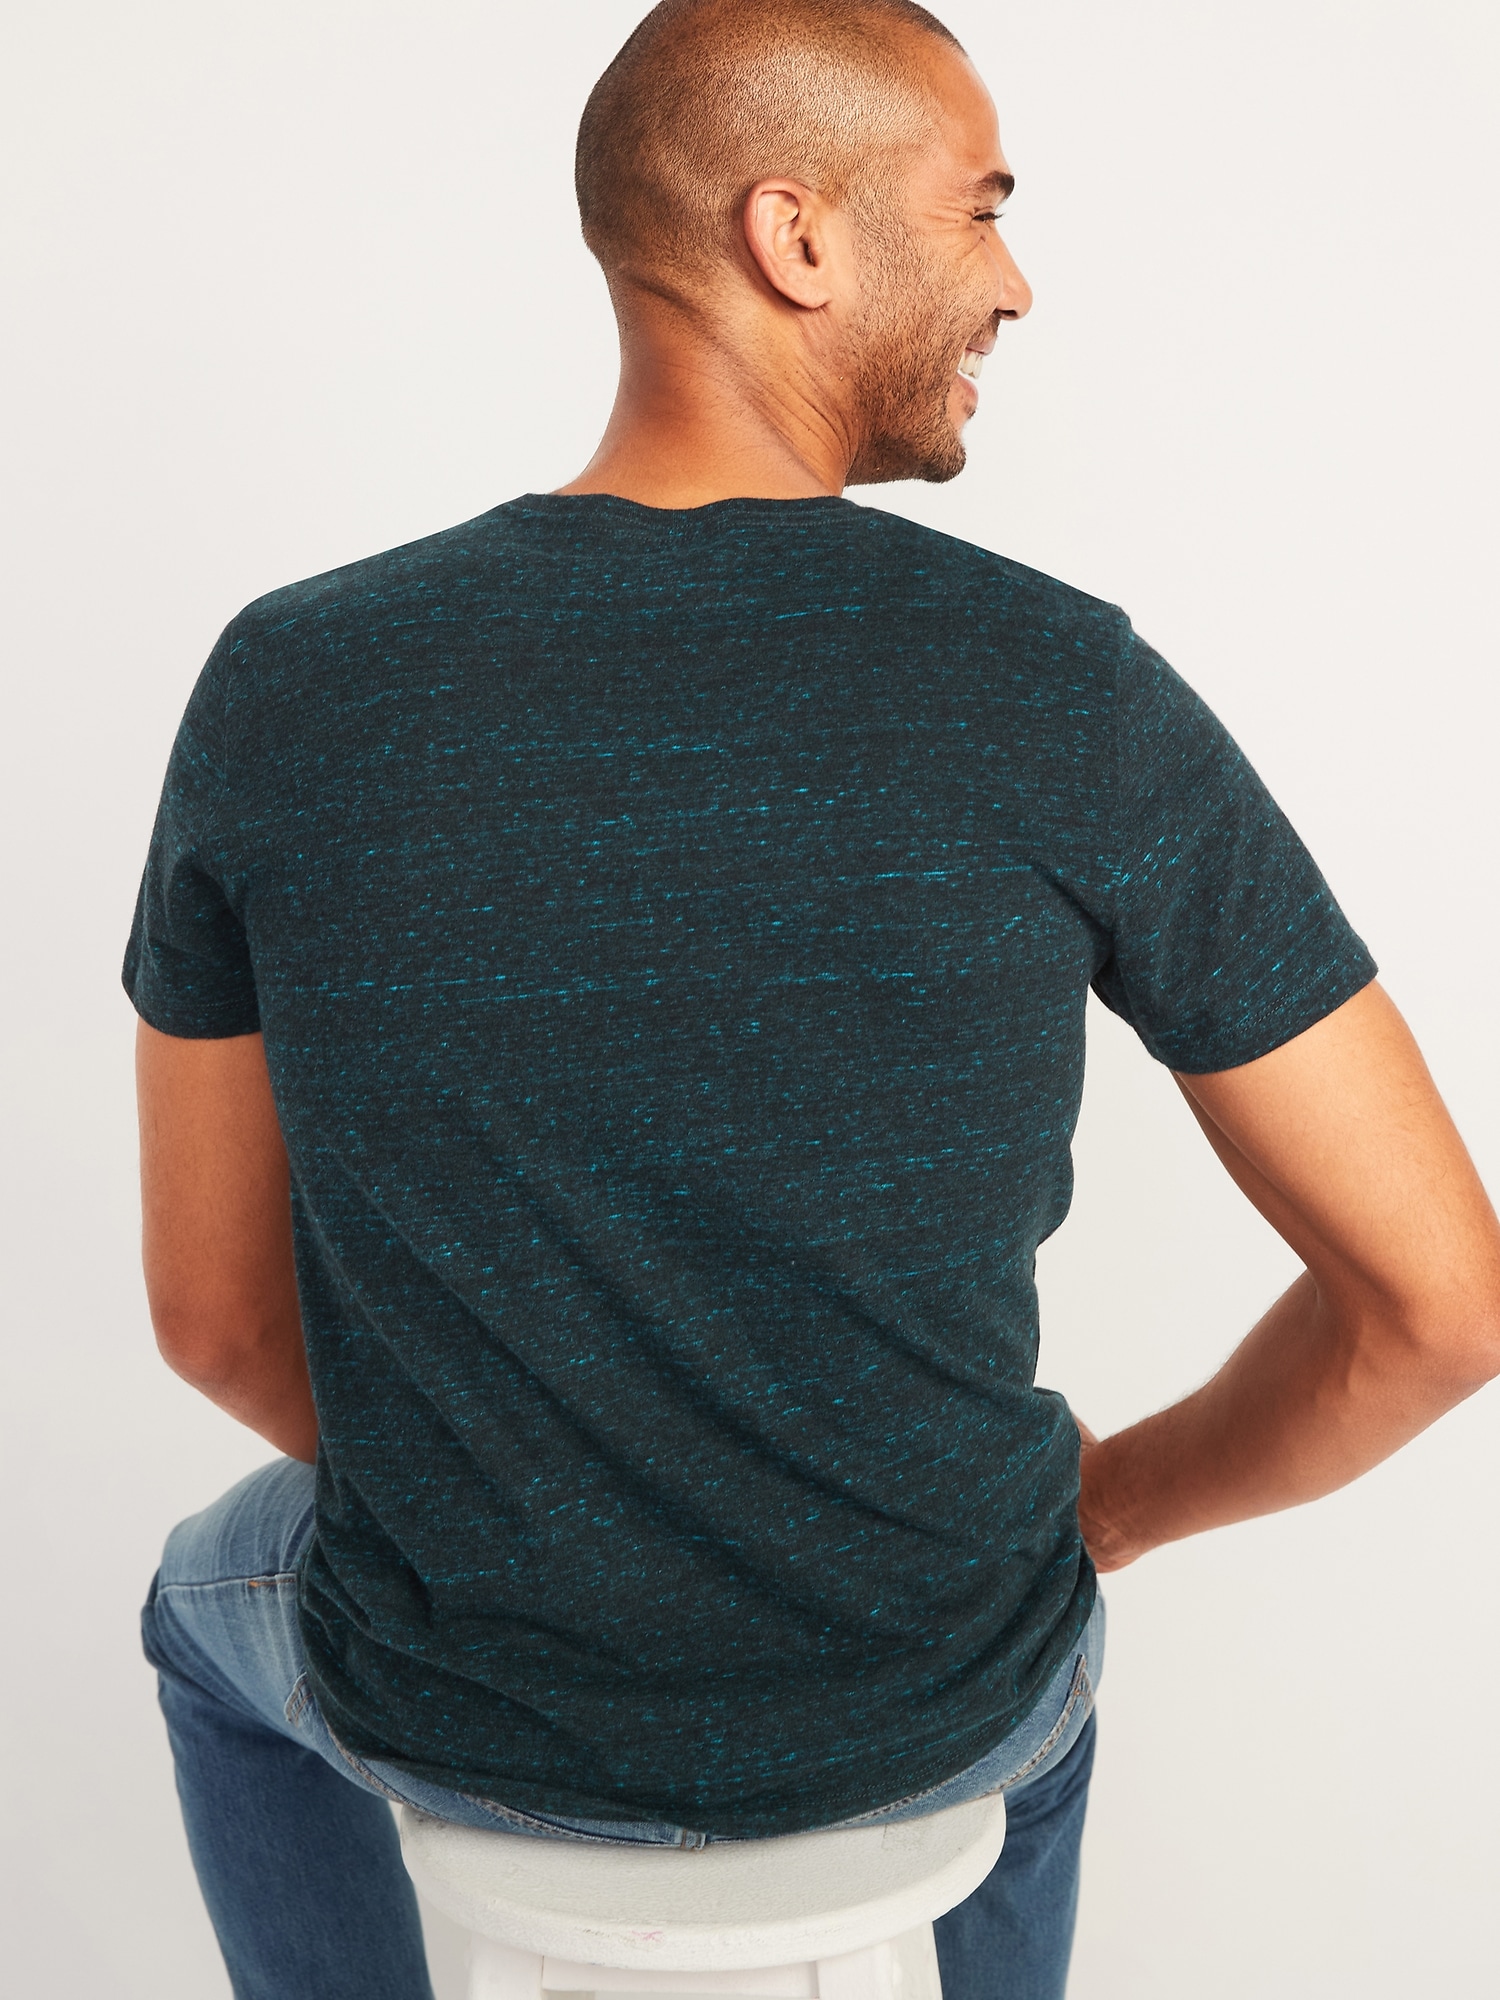 Soft-Washed Crew-Neck T-Shirt for Men | Old Navy